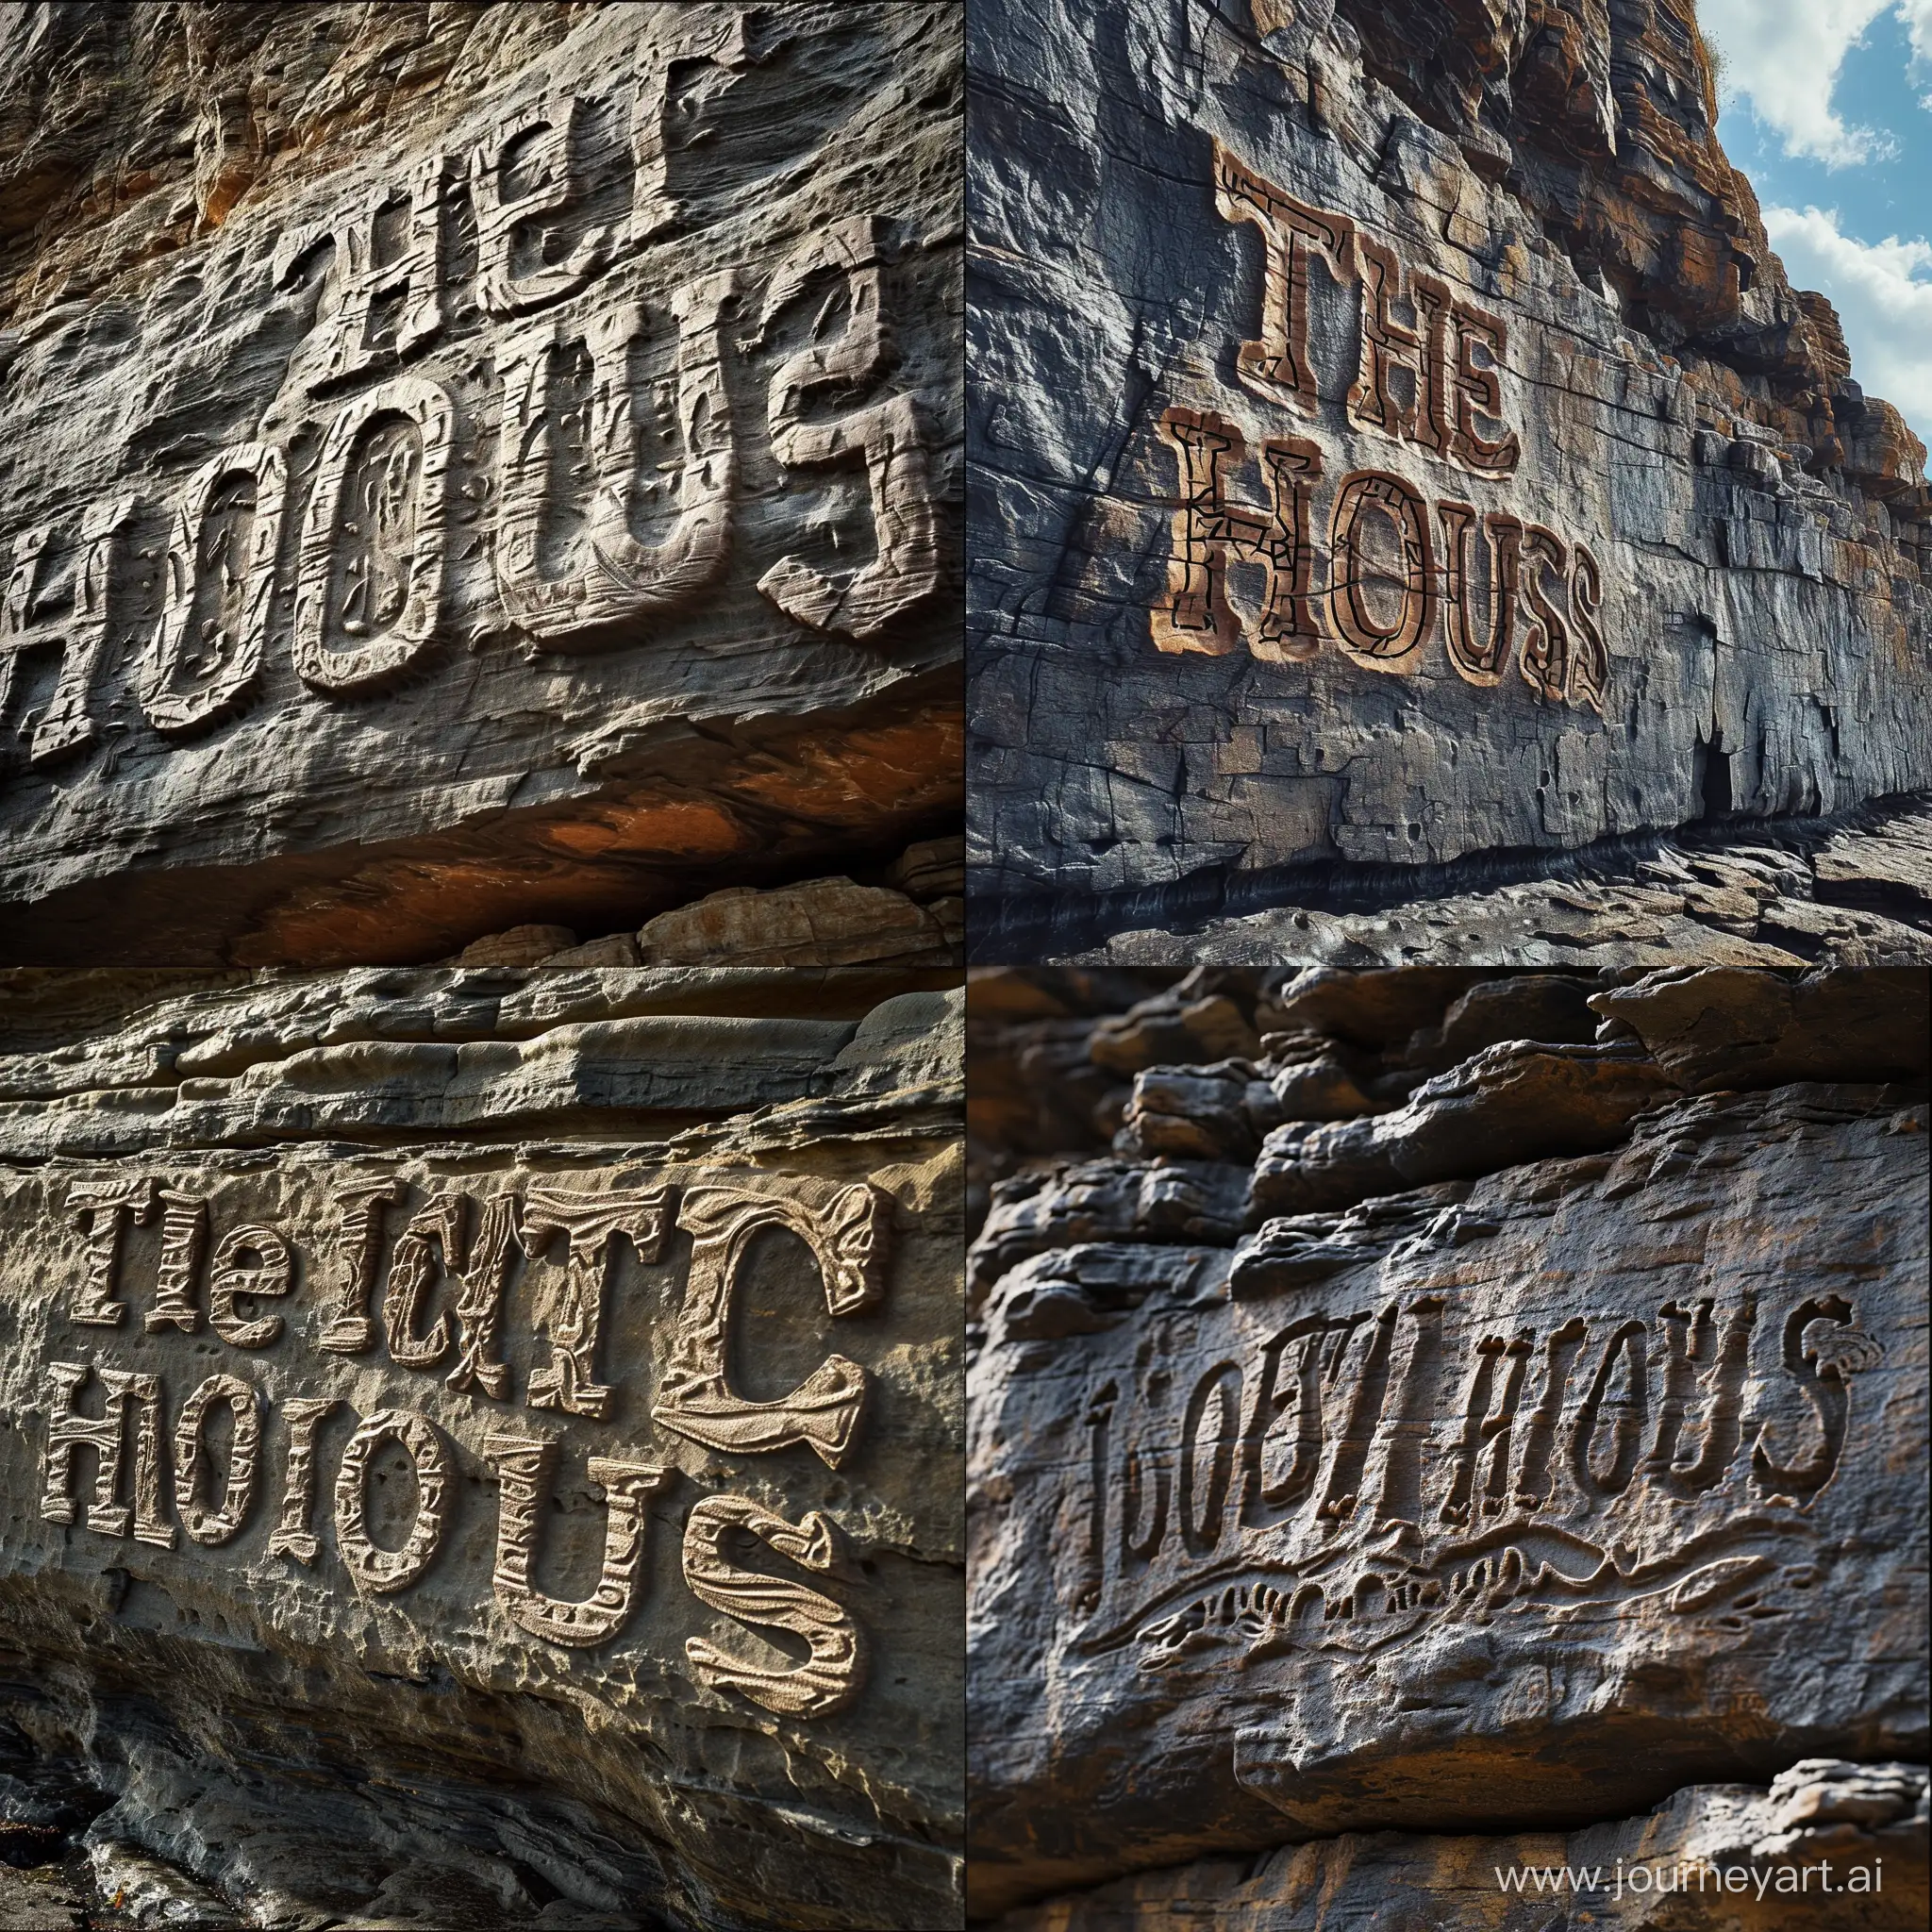 The title "The Boot House" like an intricately designed logo, carved into a rock cliff face naturally.  Epic composition.  Highly detailed.   The words are clearly legible and protrude naturally from the rock face. 